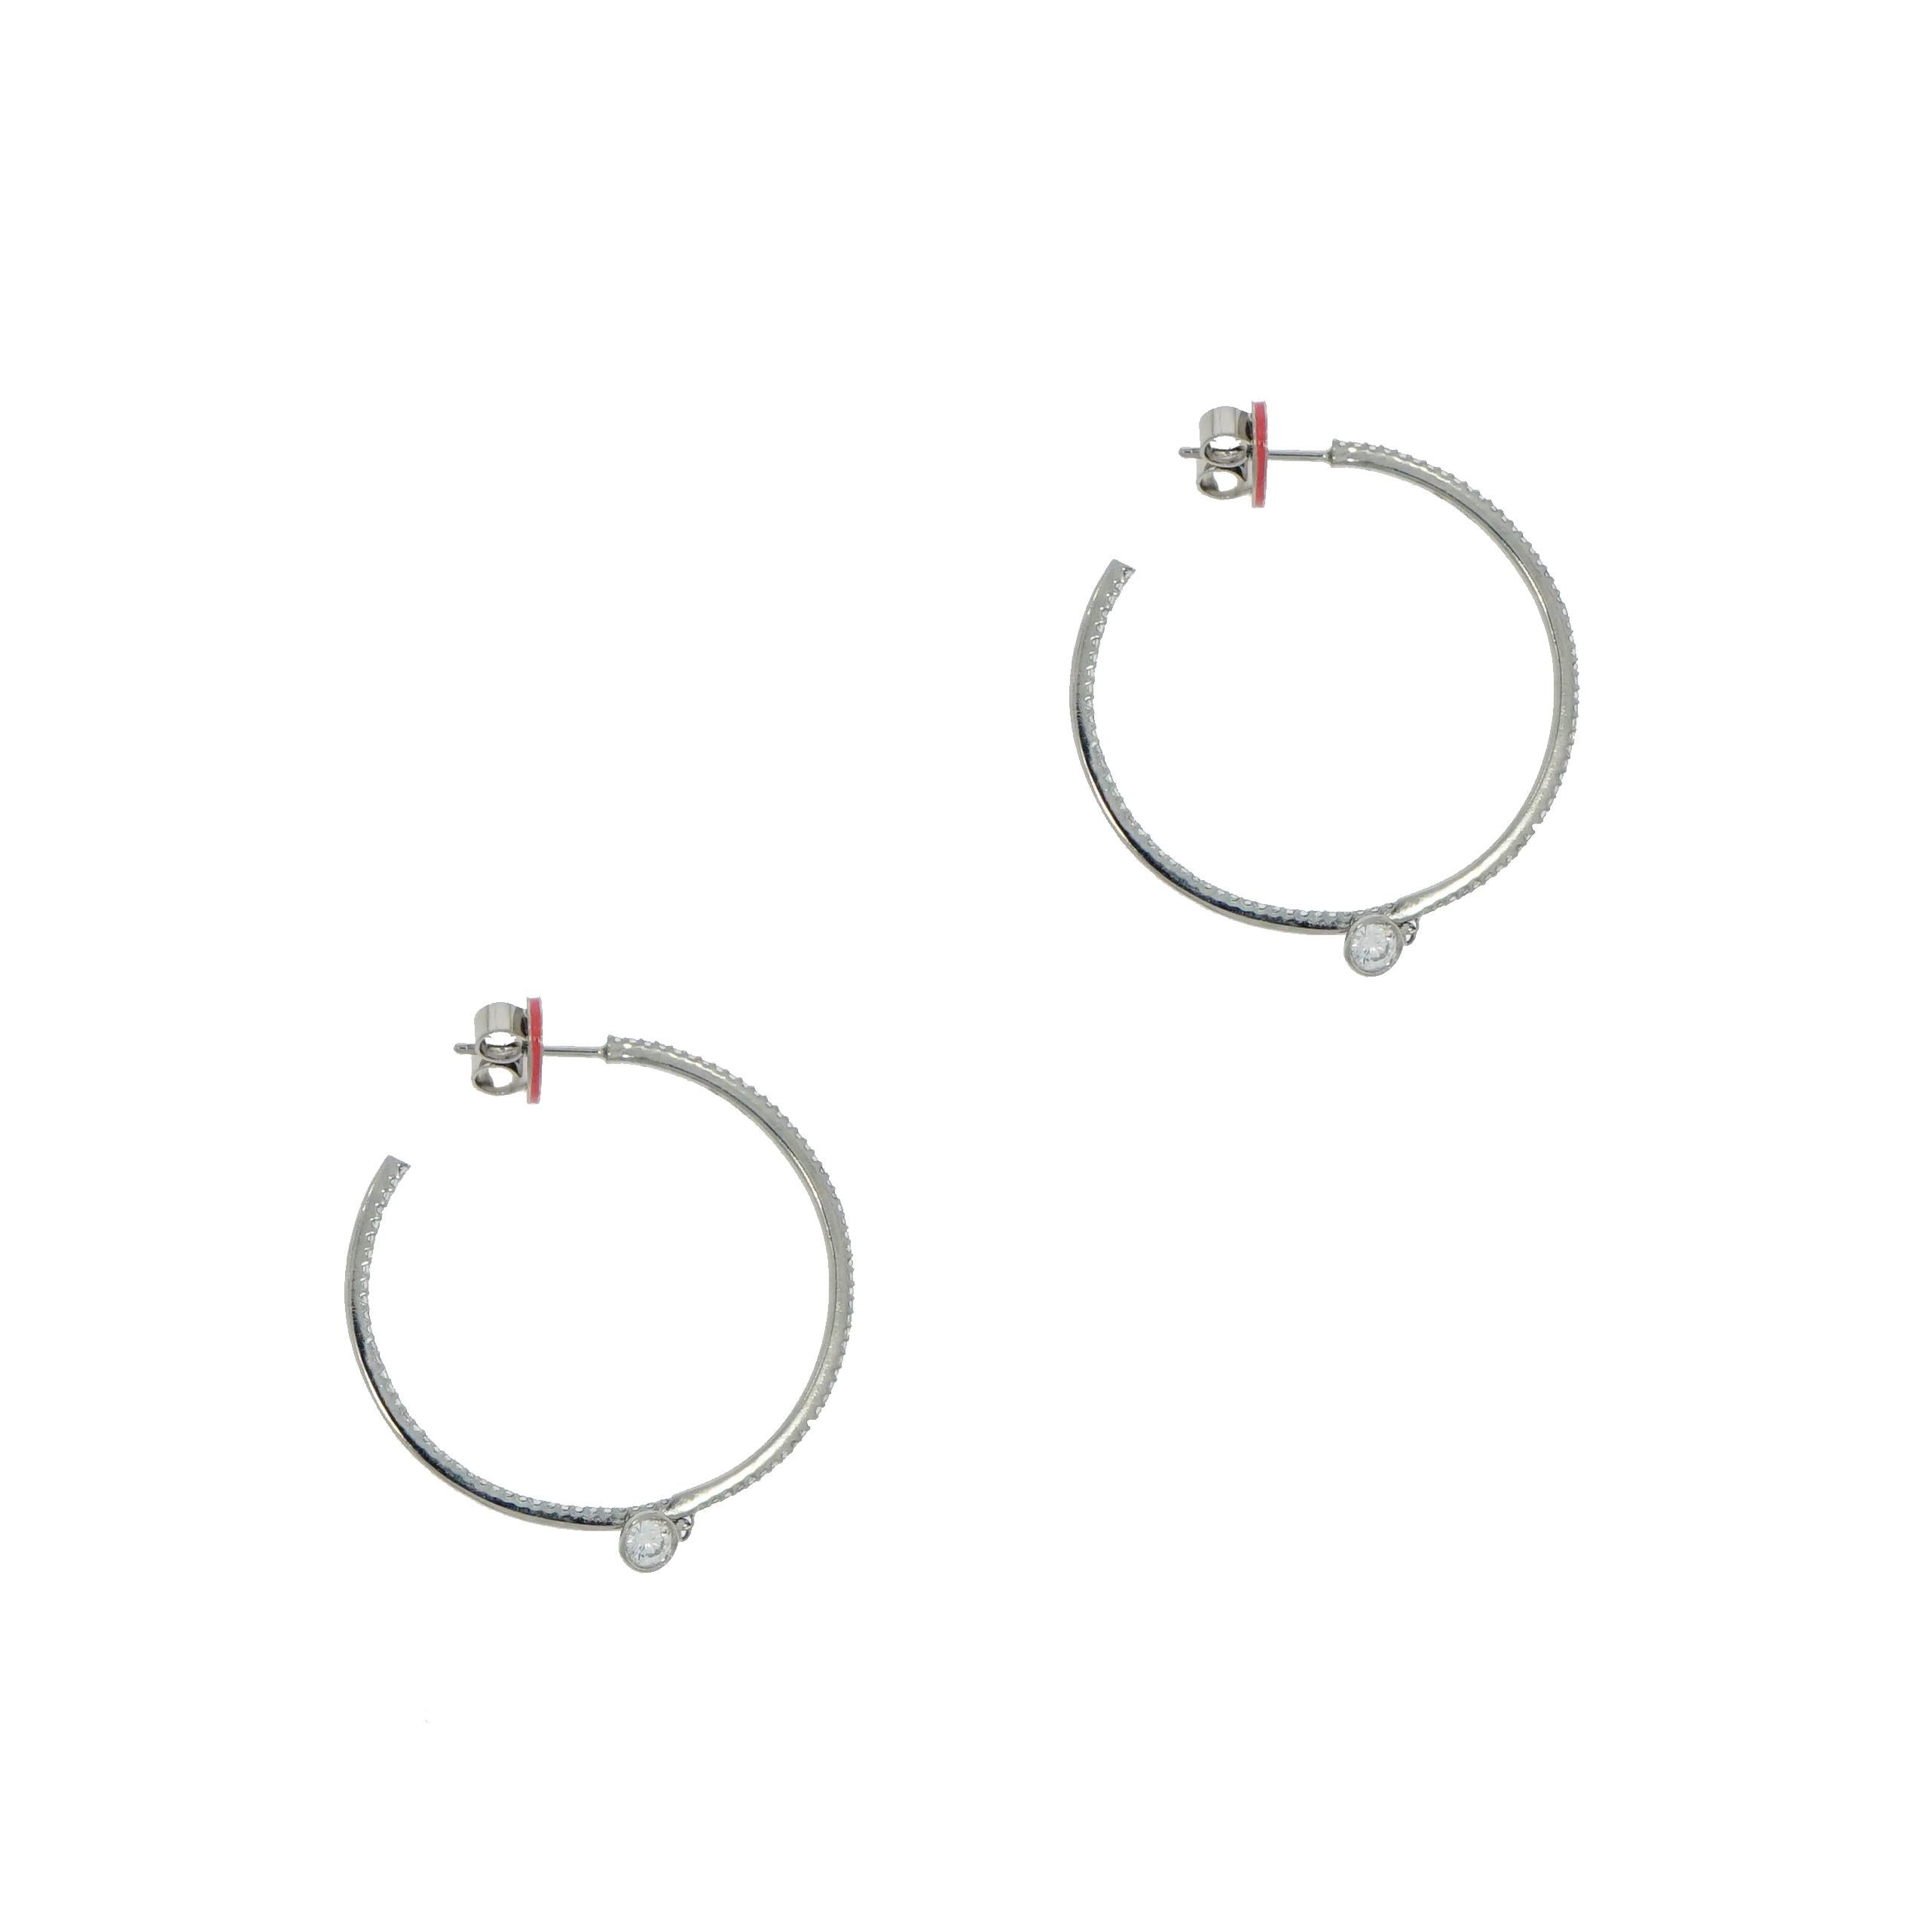 Designed by Ivanka Trump, these thin diamond hoop earrings are crafted in 18k white gold with round brilliant cut, bezel-set diamond charm. Containing 182 round brilliant cut diamonds and weighing 1.16 total carats (G-H color/SI1 clarity).  
A must